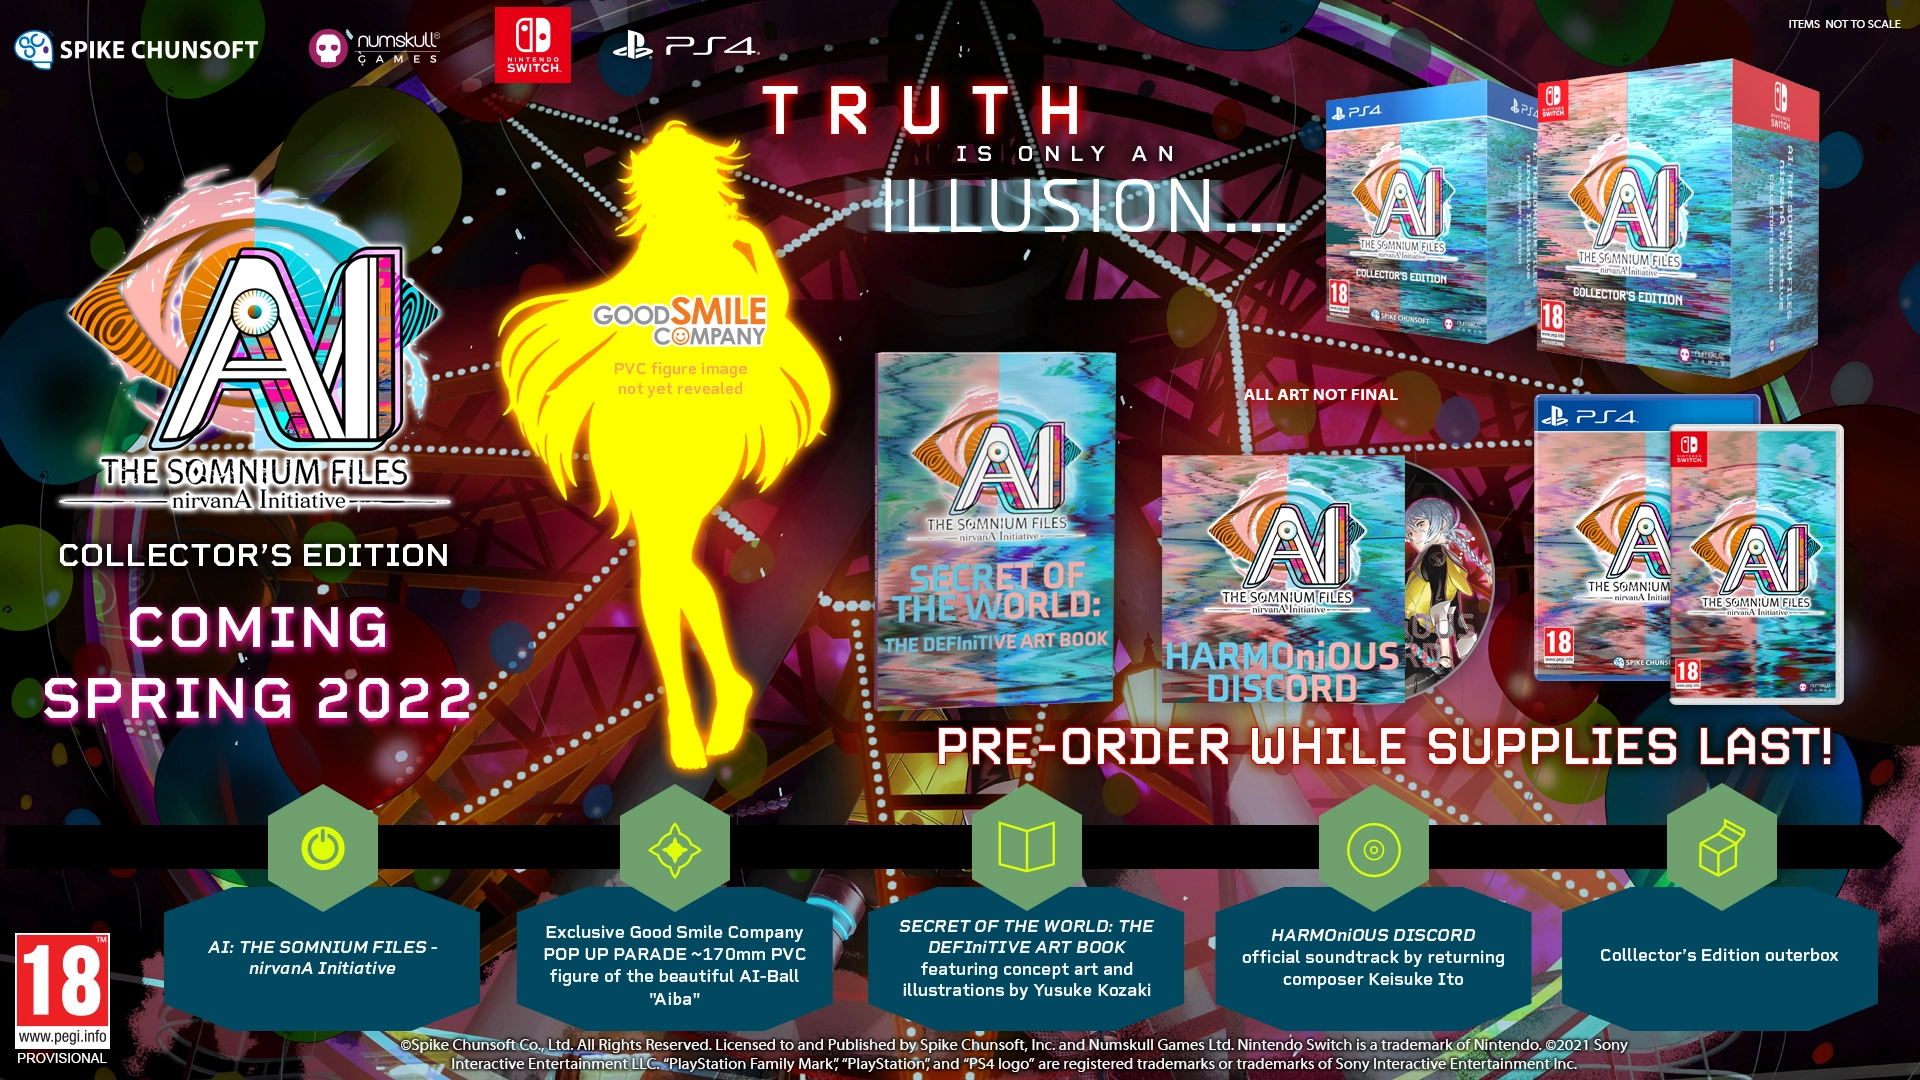 AI: The Somnium Files – nirvanA Initiative - Collector's Edition (Switch), Numskull Games